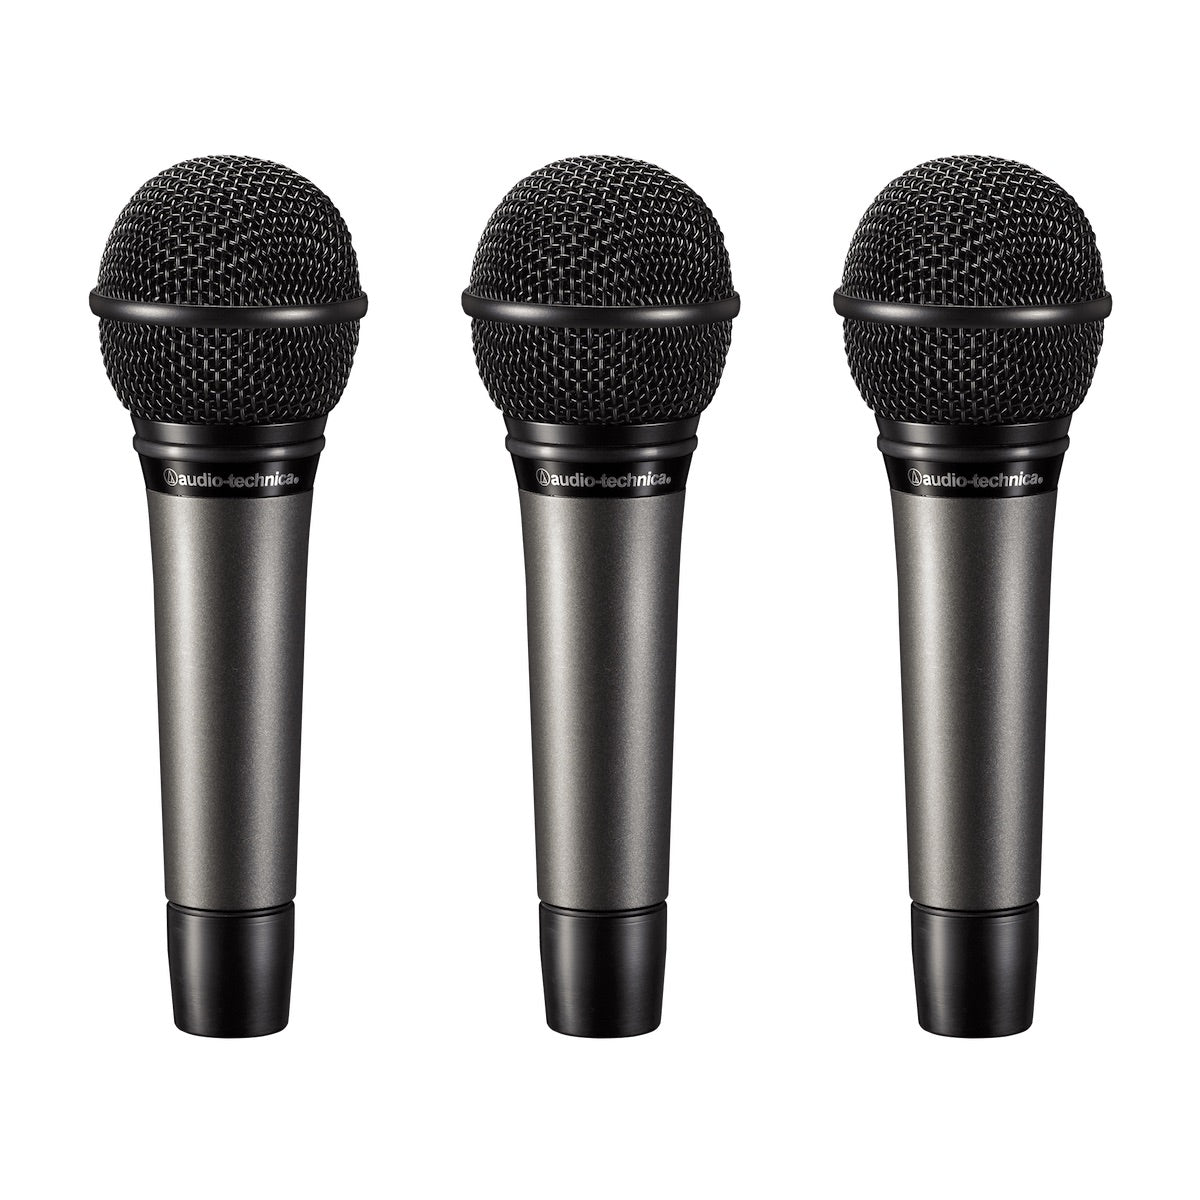 Audio-Technica ATM510PK - Cardioid Dynamic Handheld Microphone, 3-pack